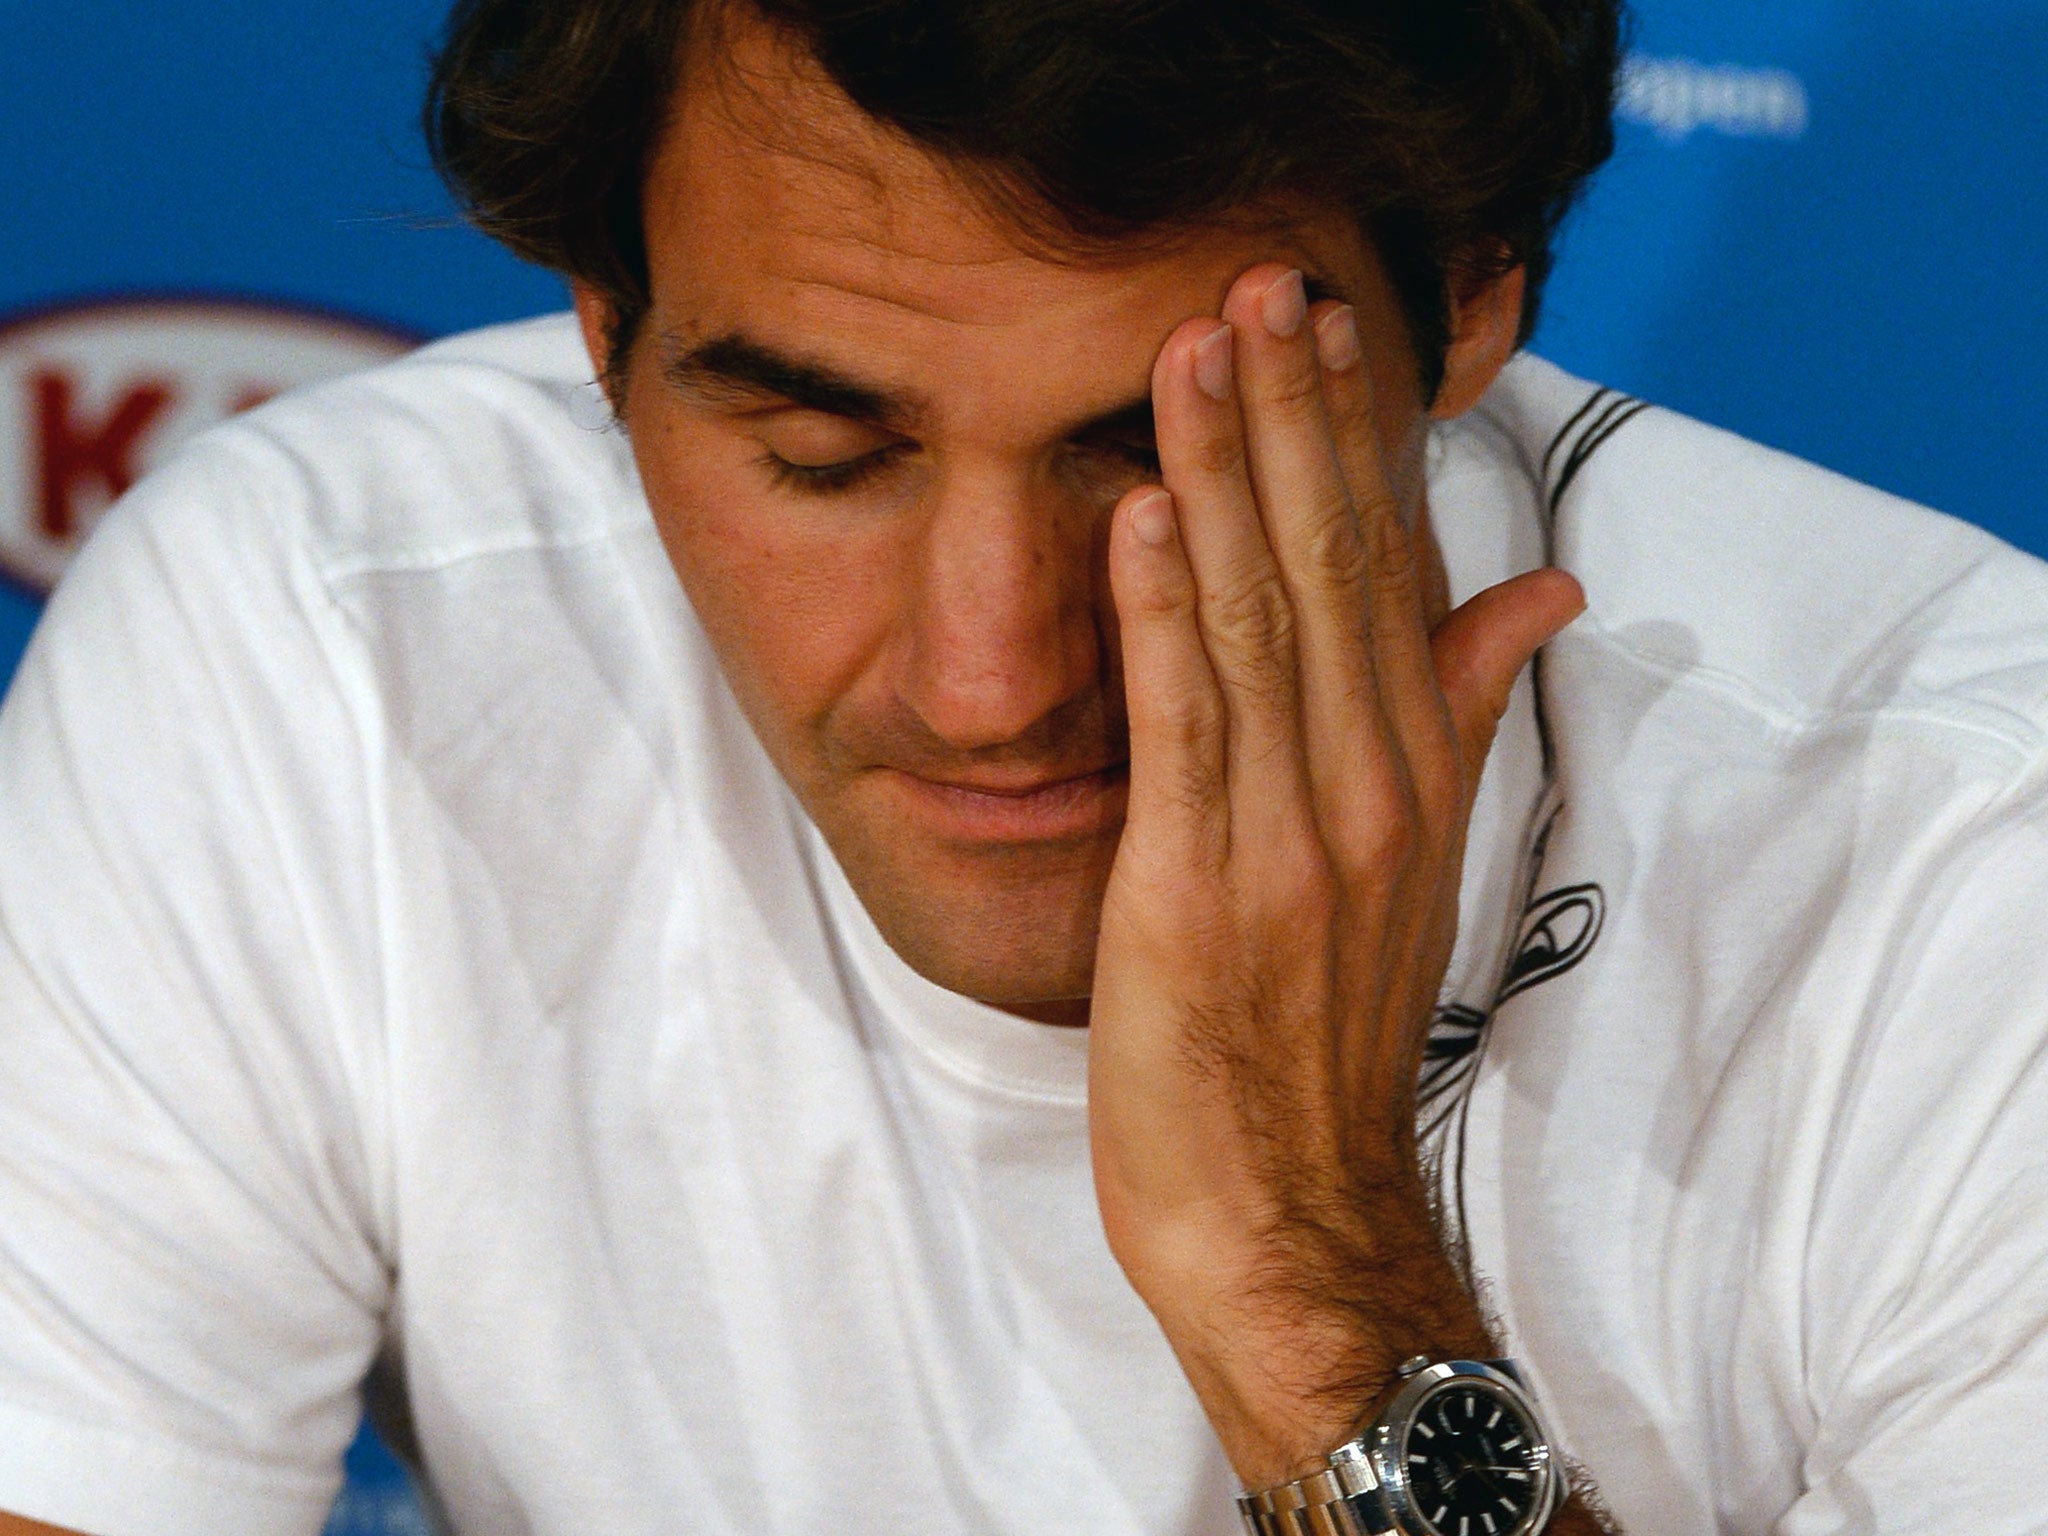 Roger Federer talks to the press following his semi-final defeat to Nadal